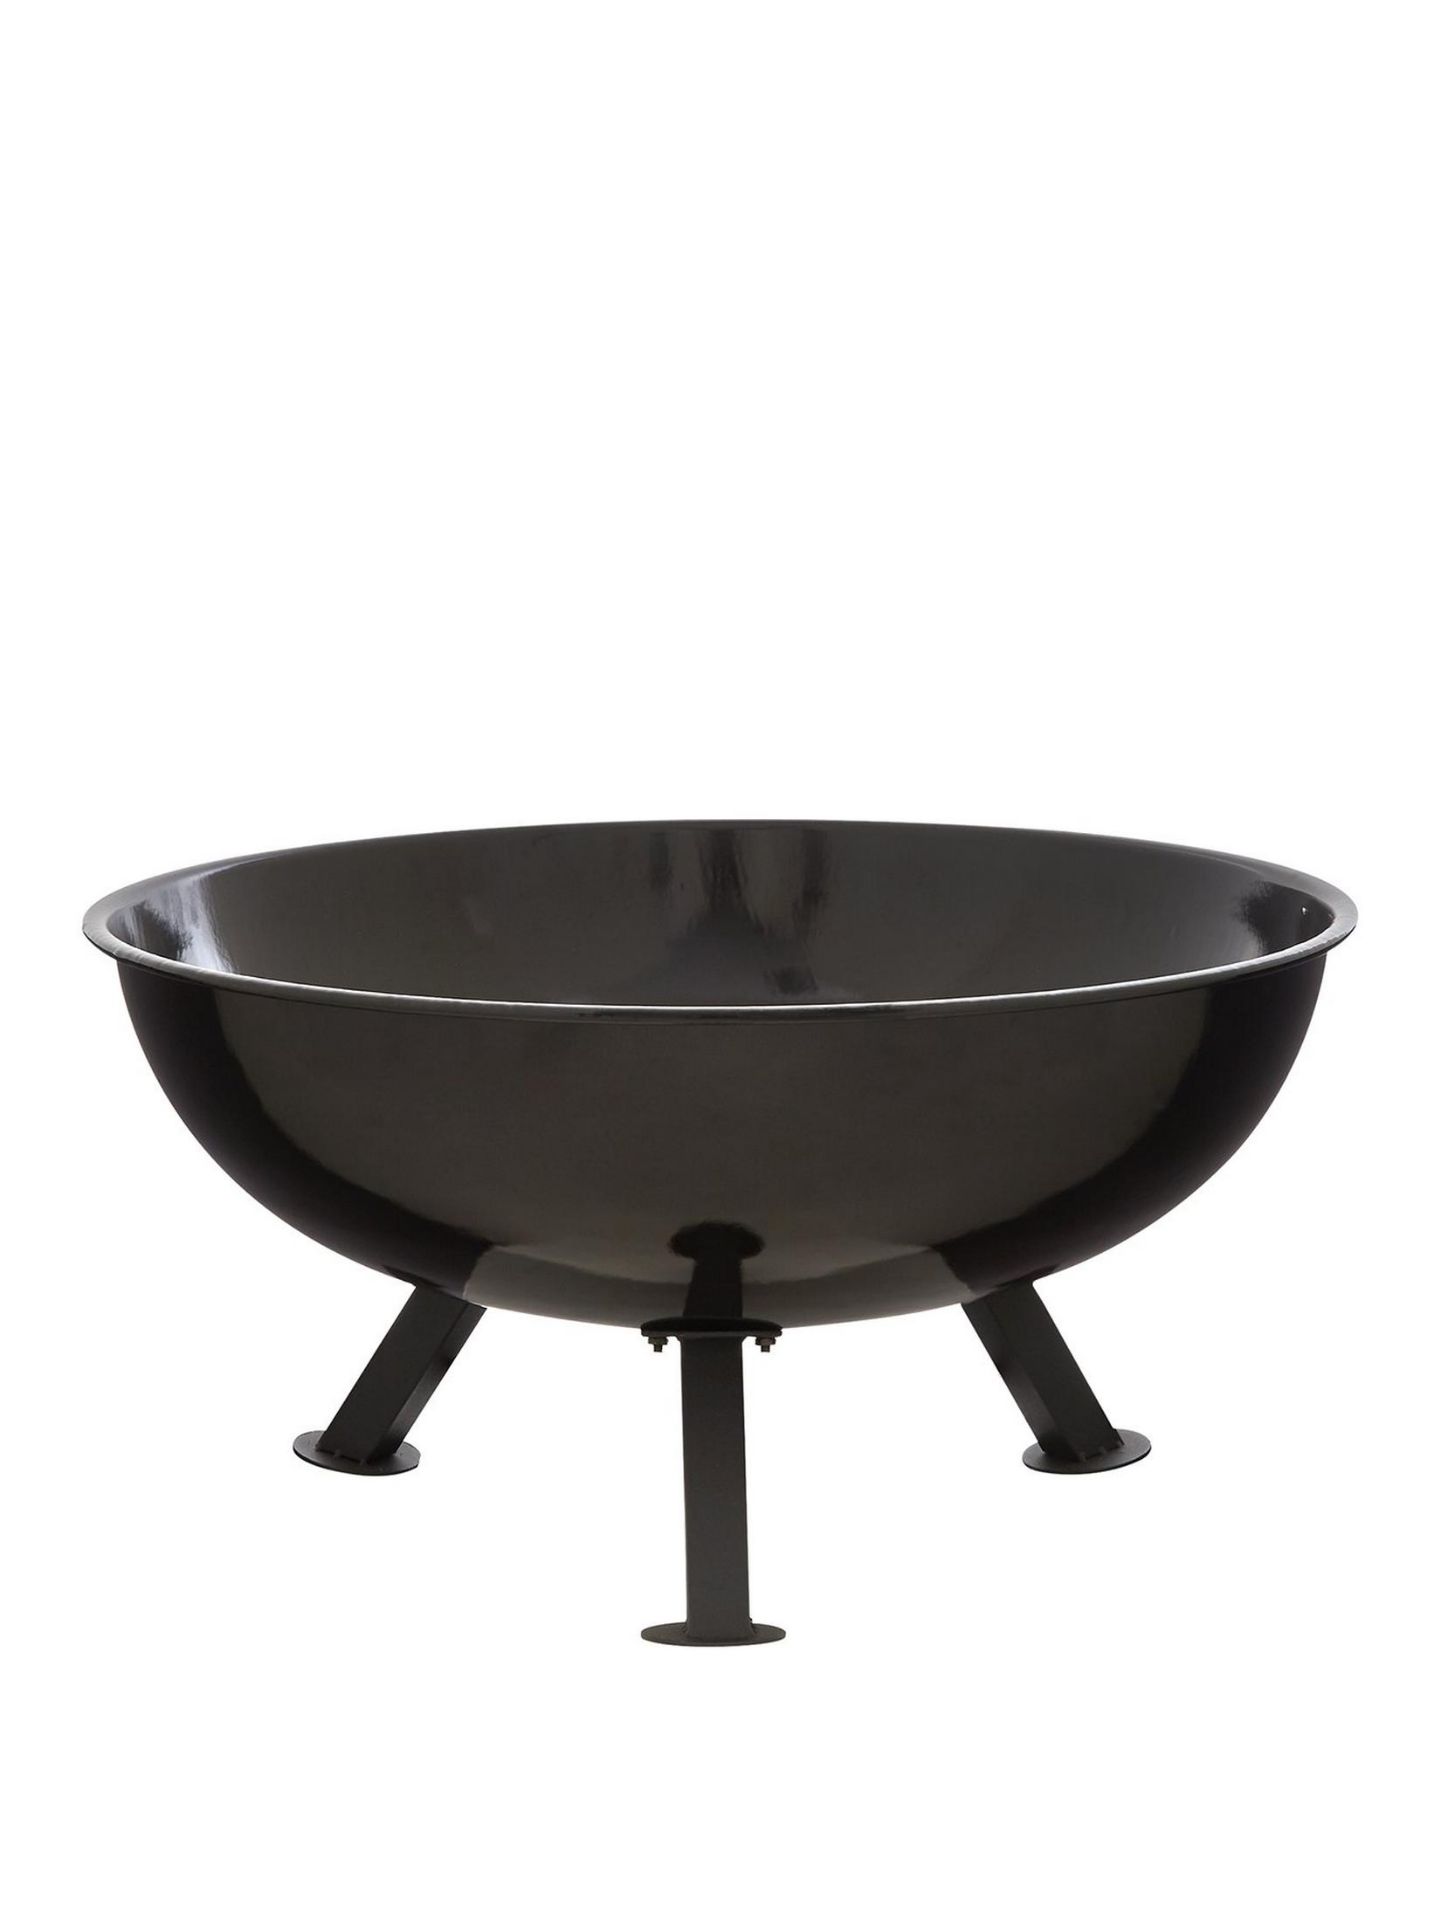 ALAMO FIRE BOWL IN BLACK - RRP £75 - Image 2 of 4